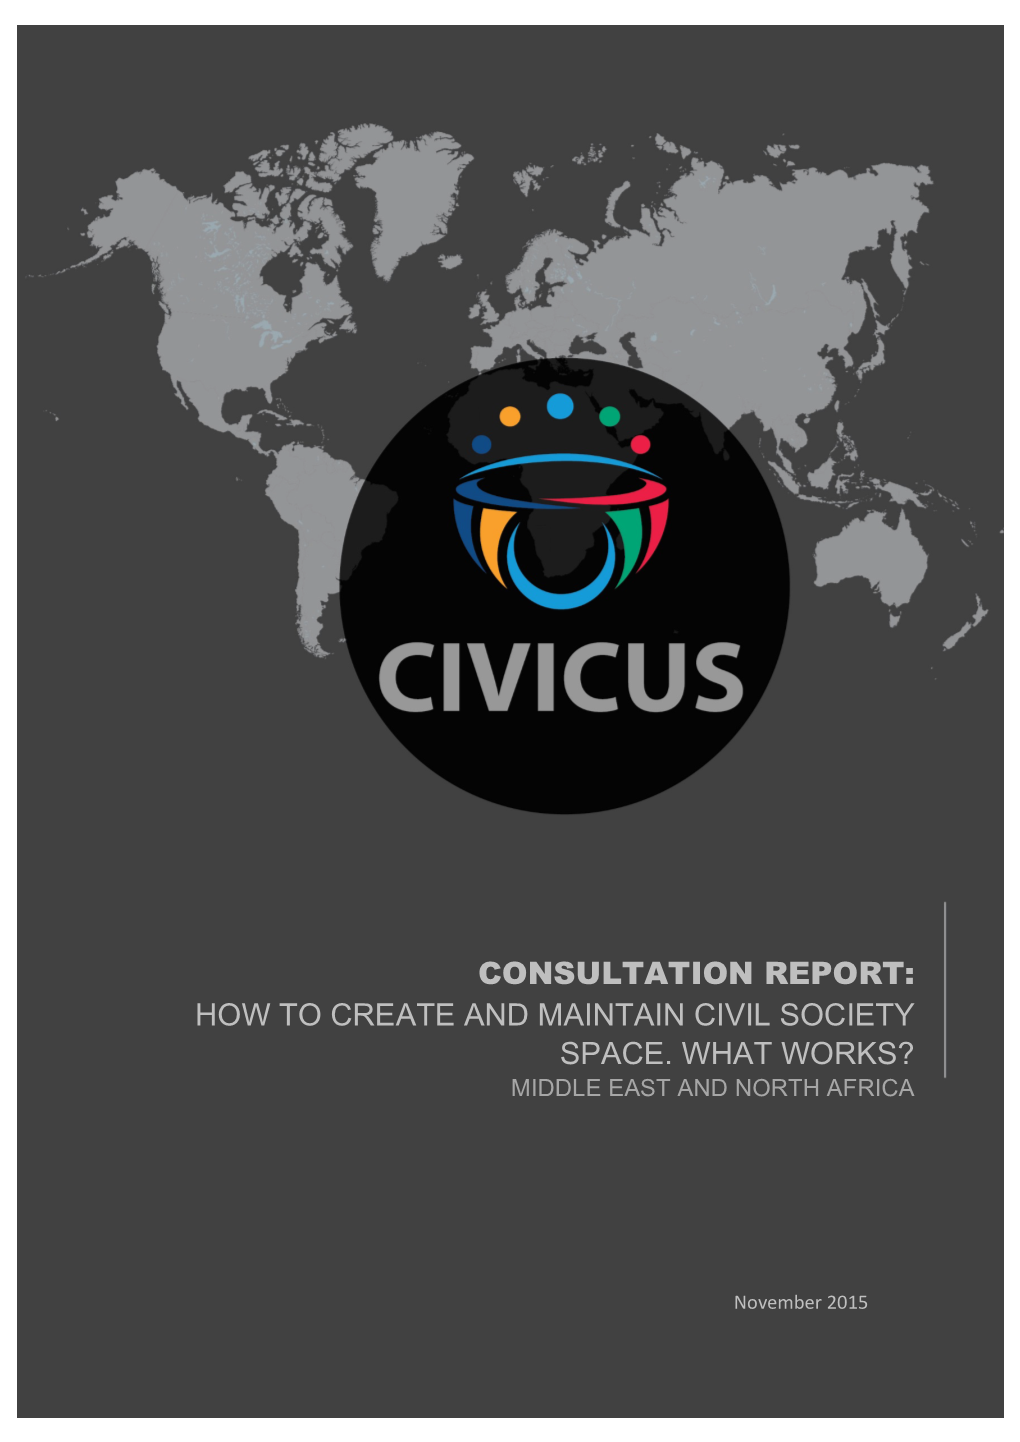 Consultation Report: How to Create and Maintain Civil Society Space. What Works?